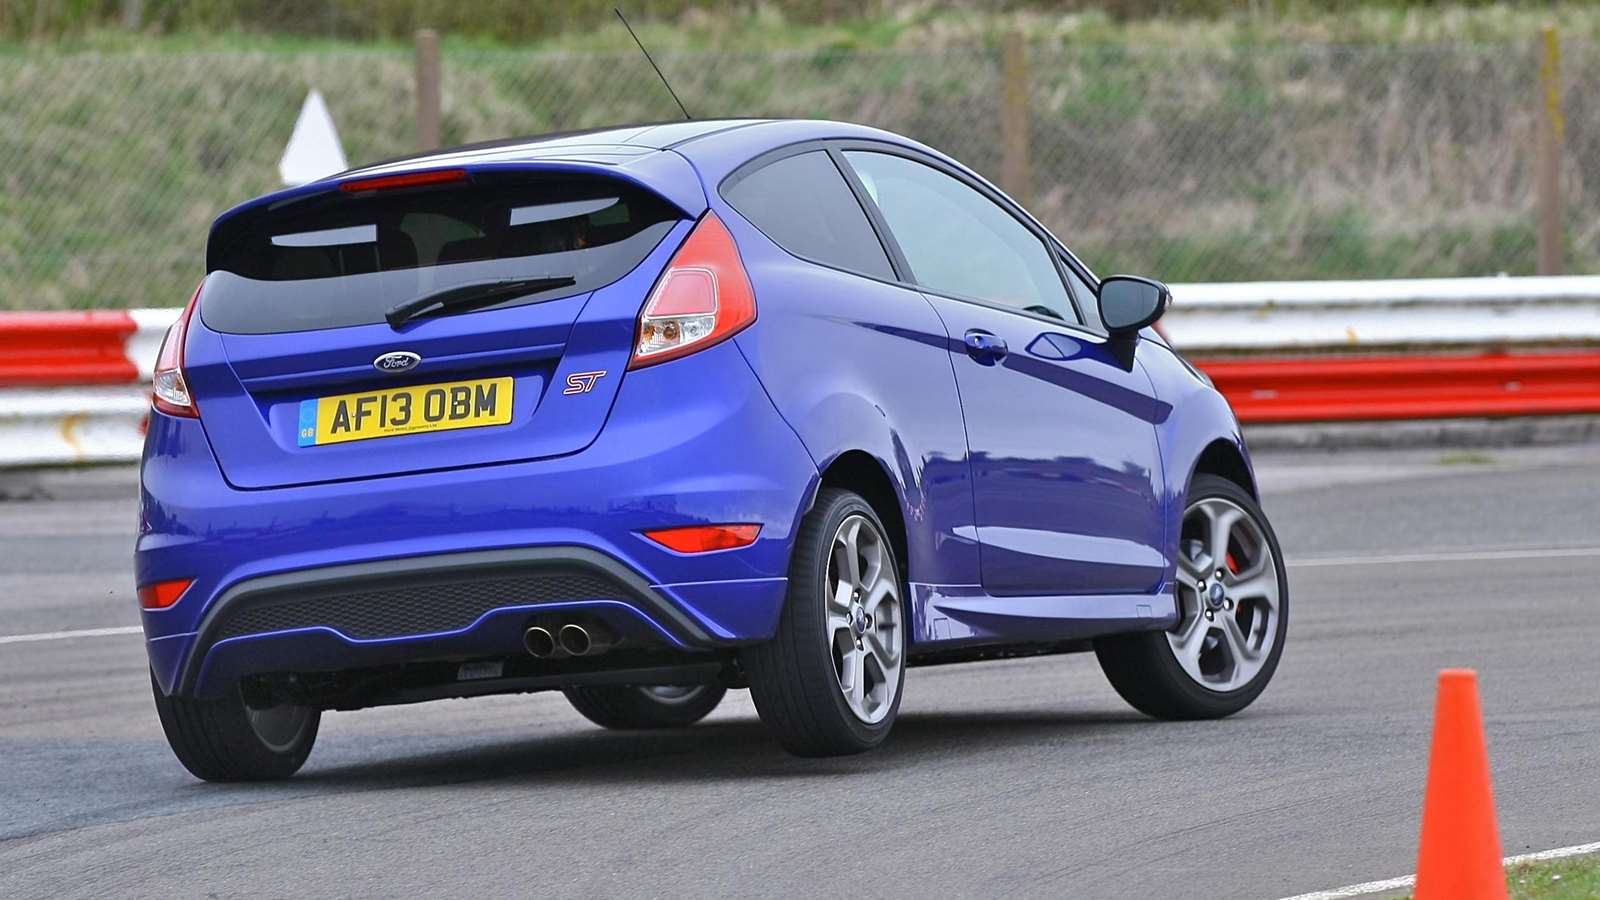 The Fiesta ST offered driving perfection